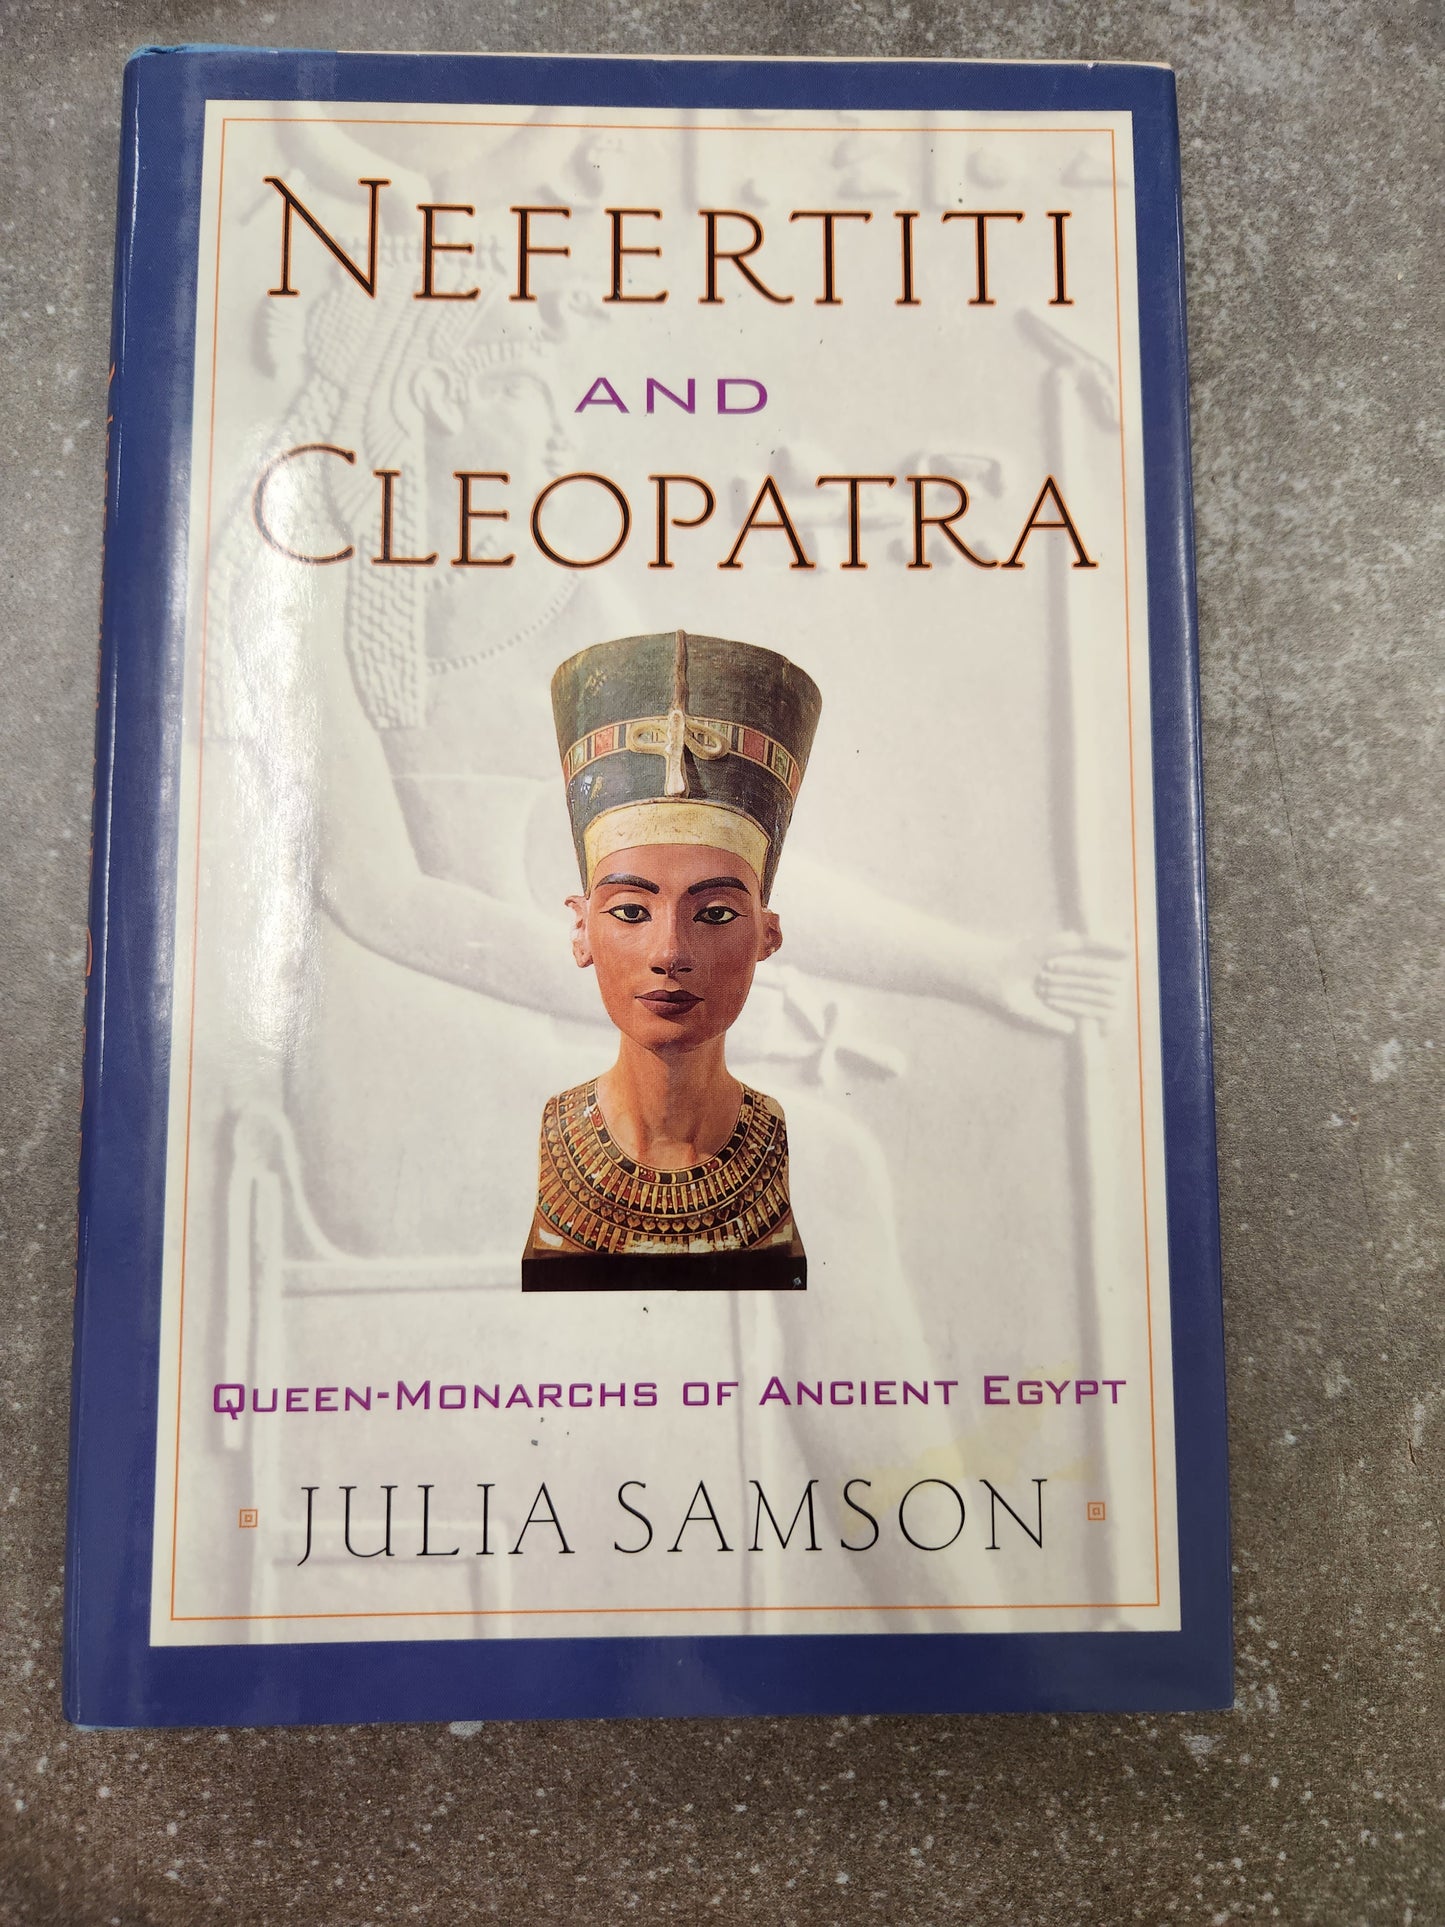 Nefertiti and Cleopatra: Queen-Monarchs of Ancient Egypt